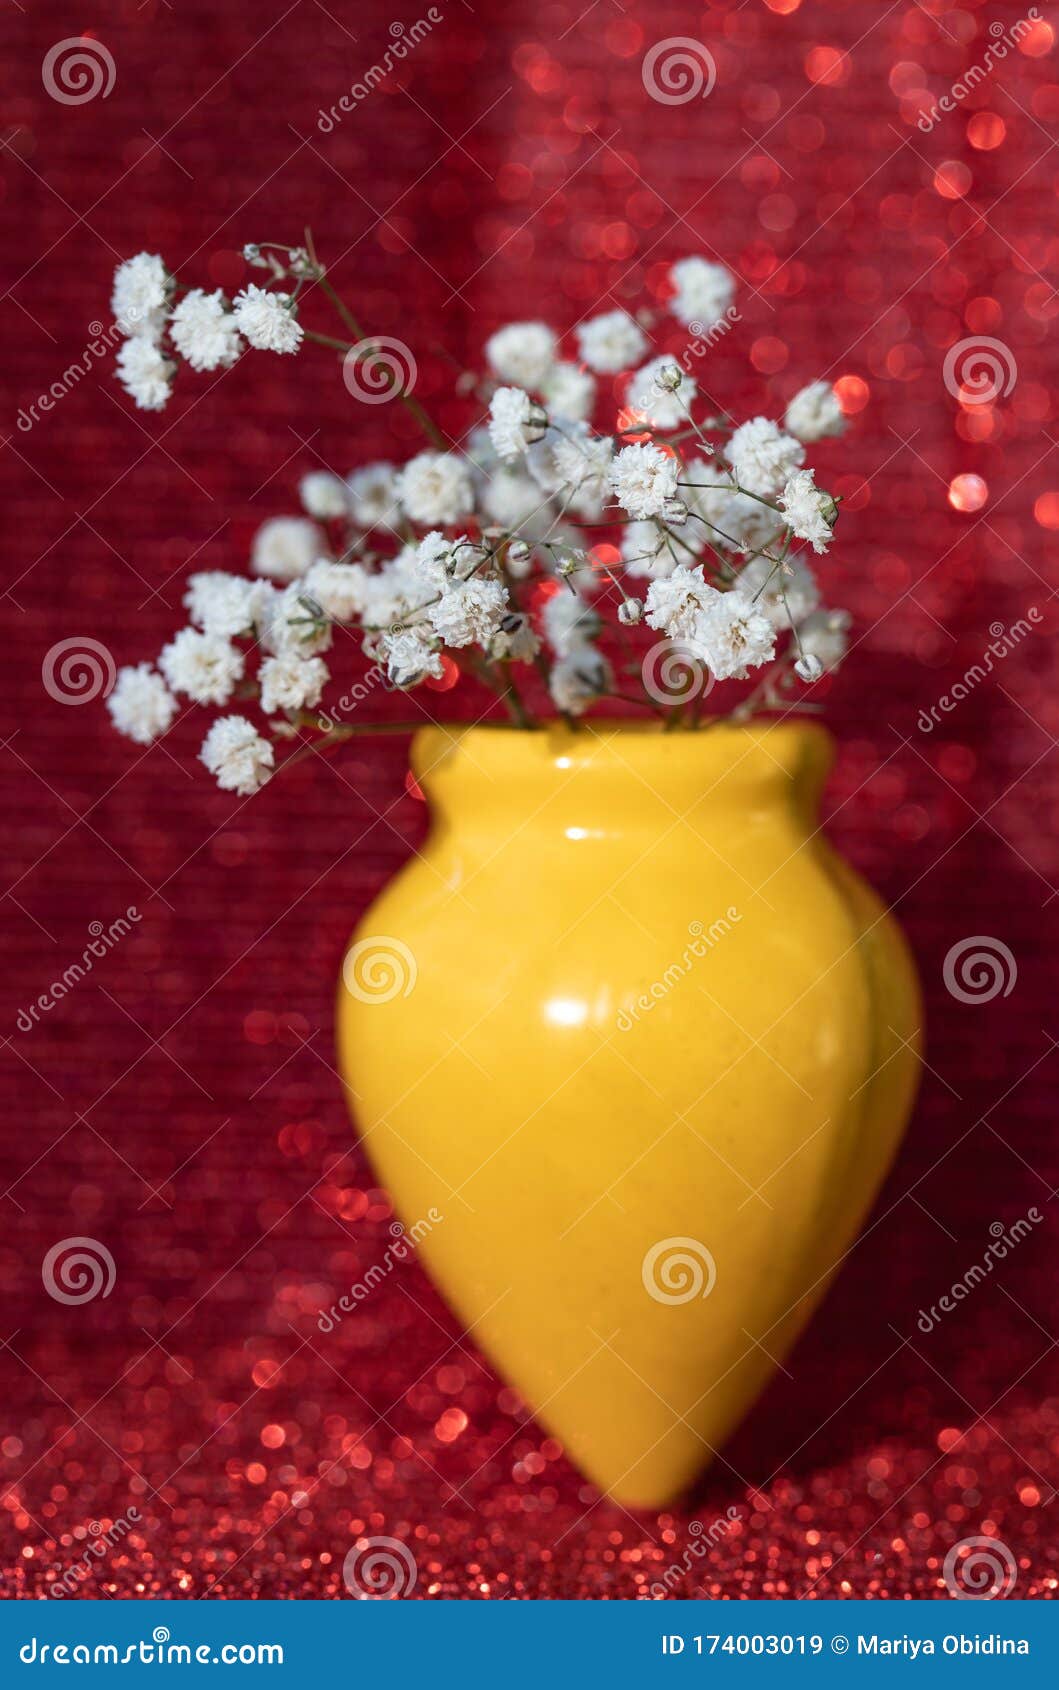 gypsophila flowers in a yellow vase on a red background.